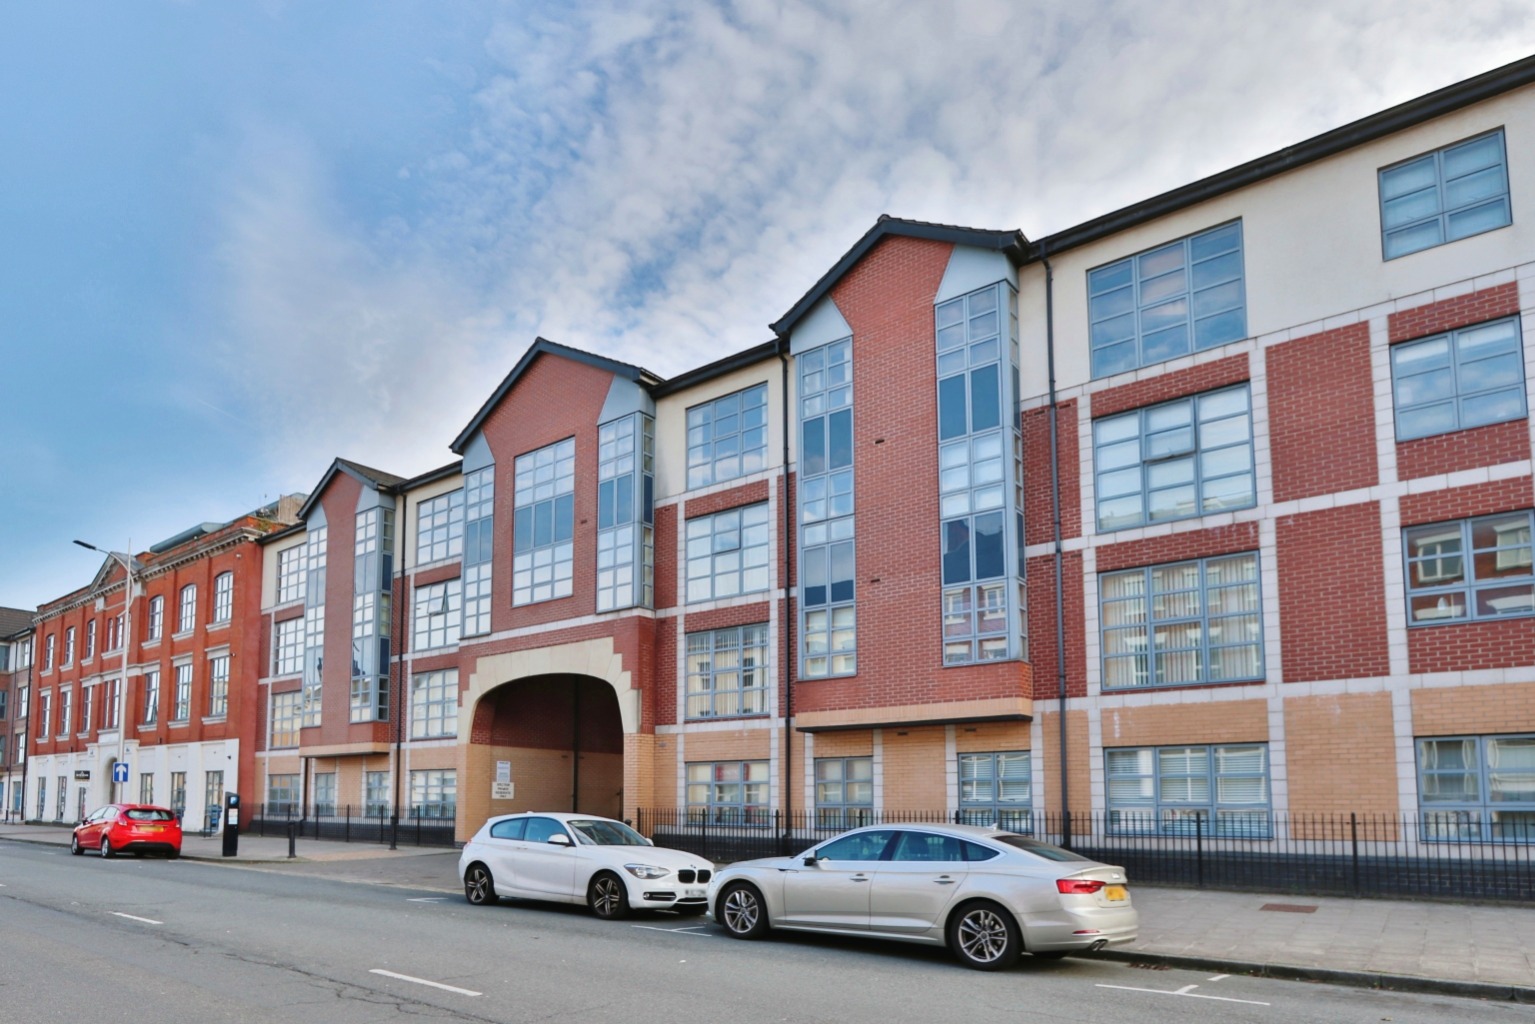 2 bed flat for sale in Wright Street, Hull - Property Image 1